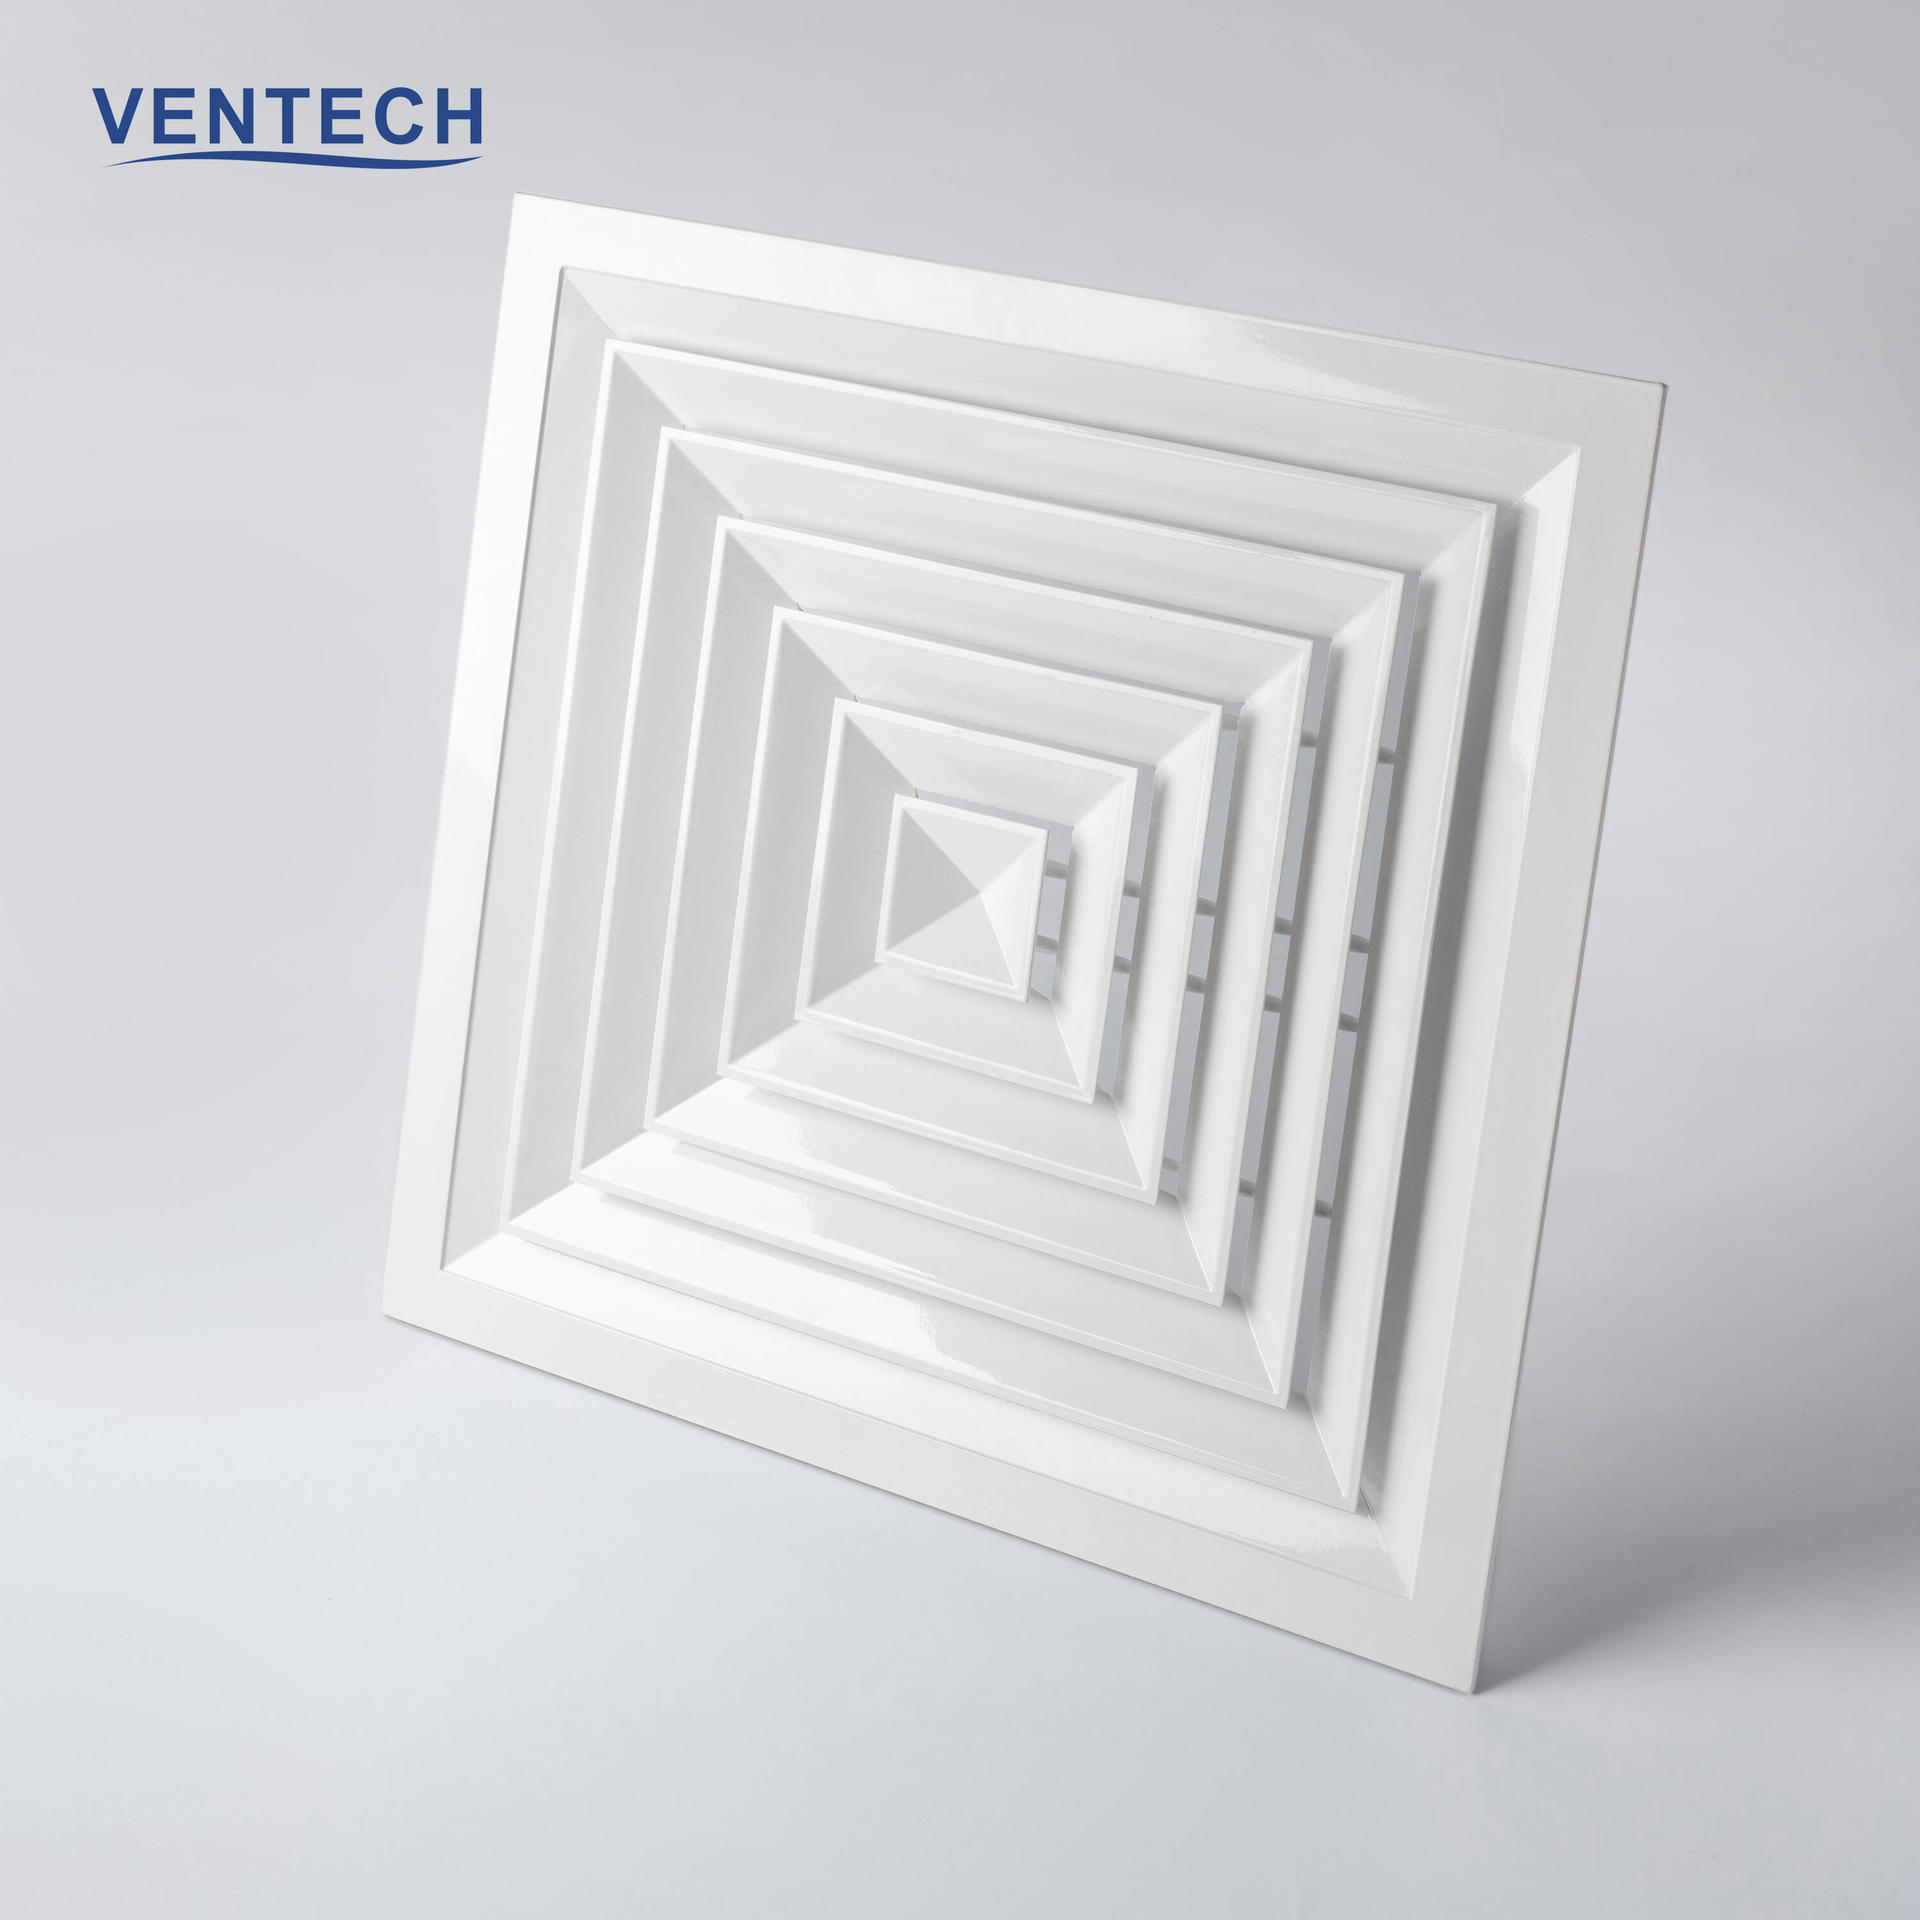 Havc VENTECH White Powder Coating Exhaust Aluminum Square Ceiling Air Duct Vent Diffusers